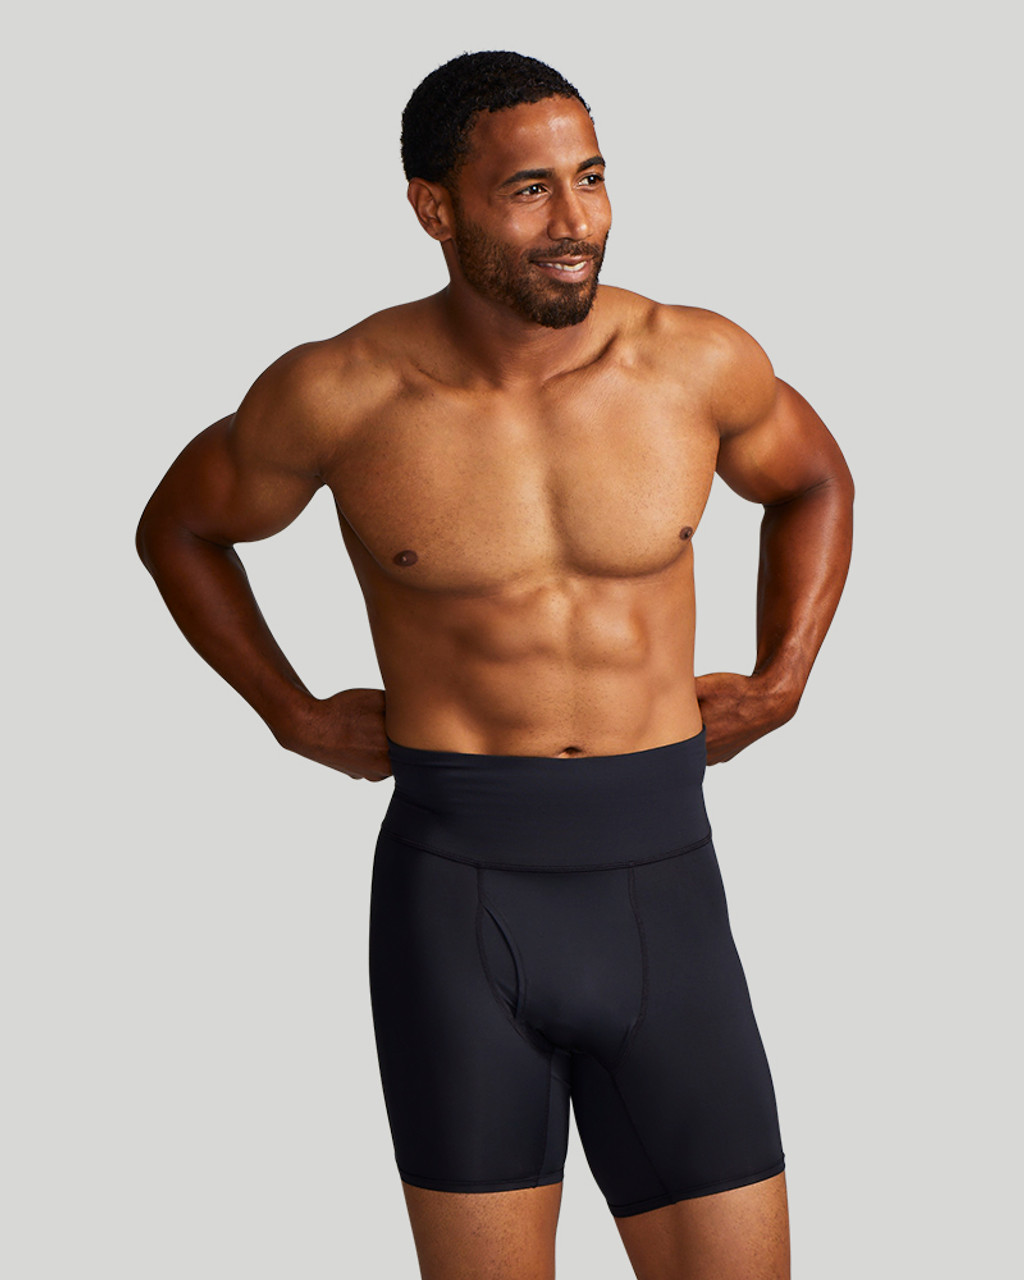 Importance of wearing gym underwear during working out for men